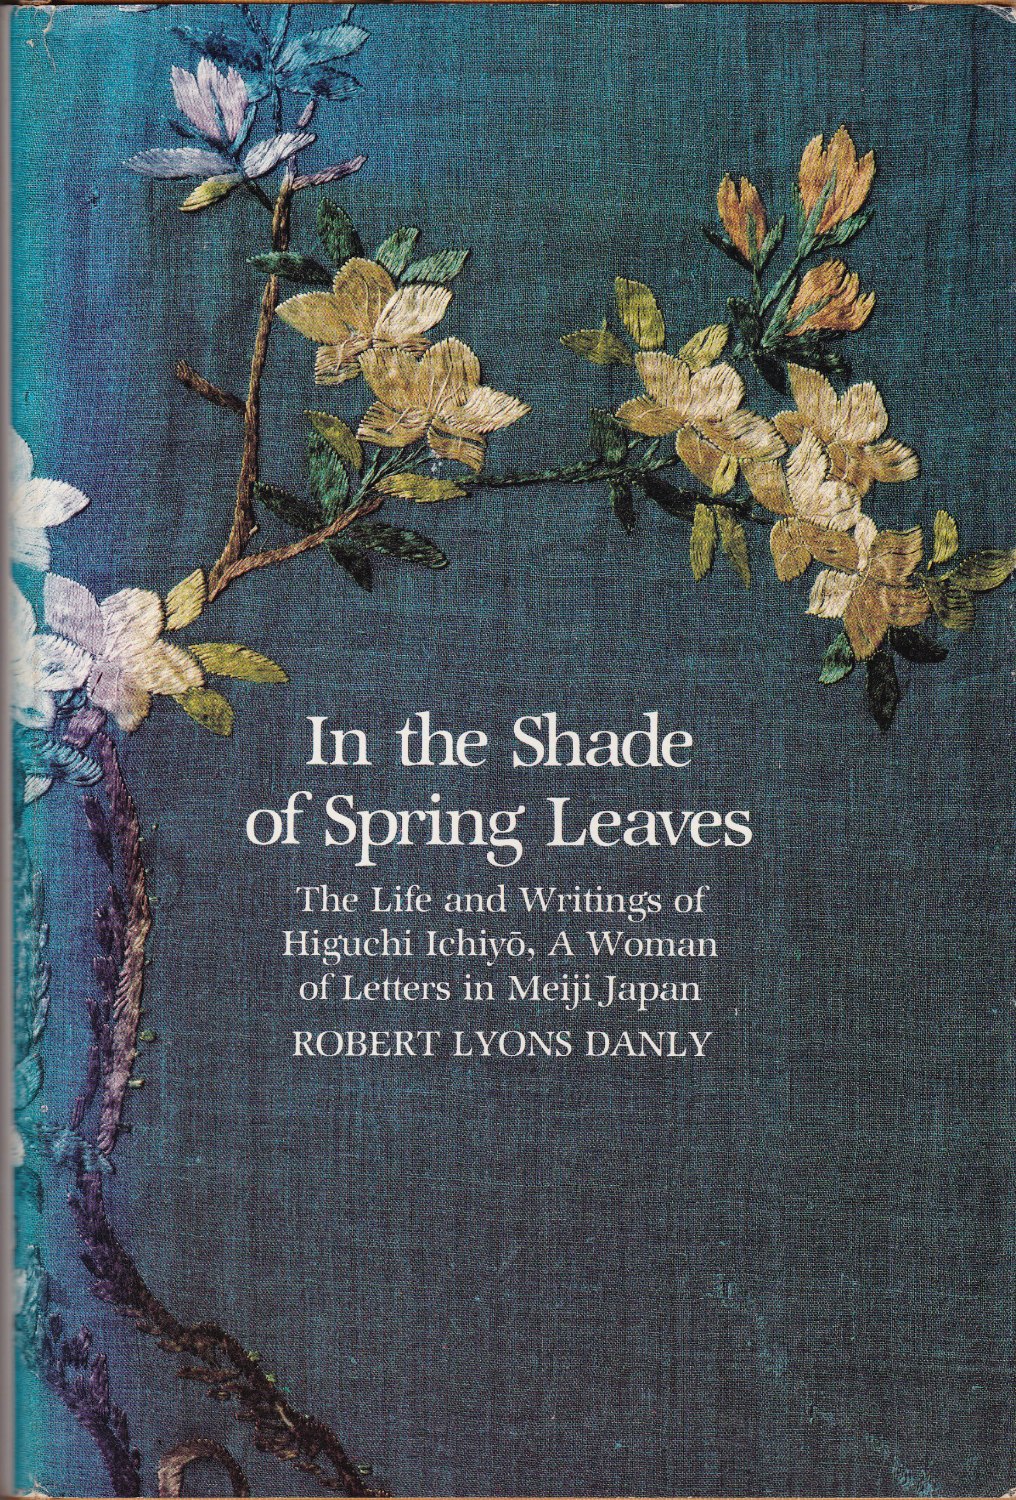 In the shade of spring leaves : the life and writings of Higuchi Ichiyo, a woman of letters in Meiji Japan.